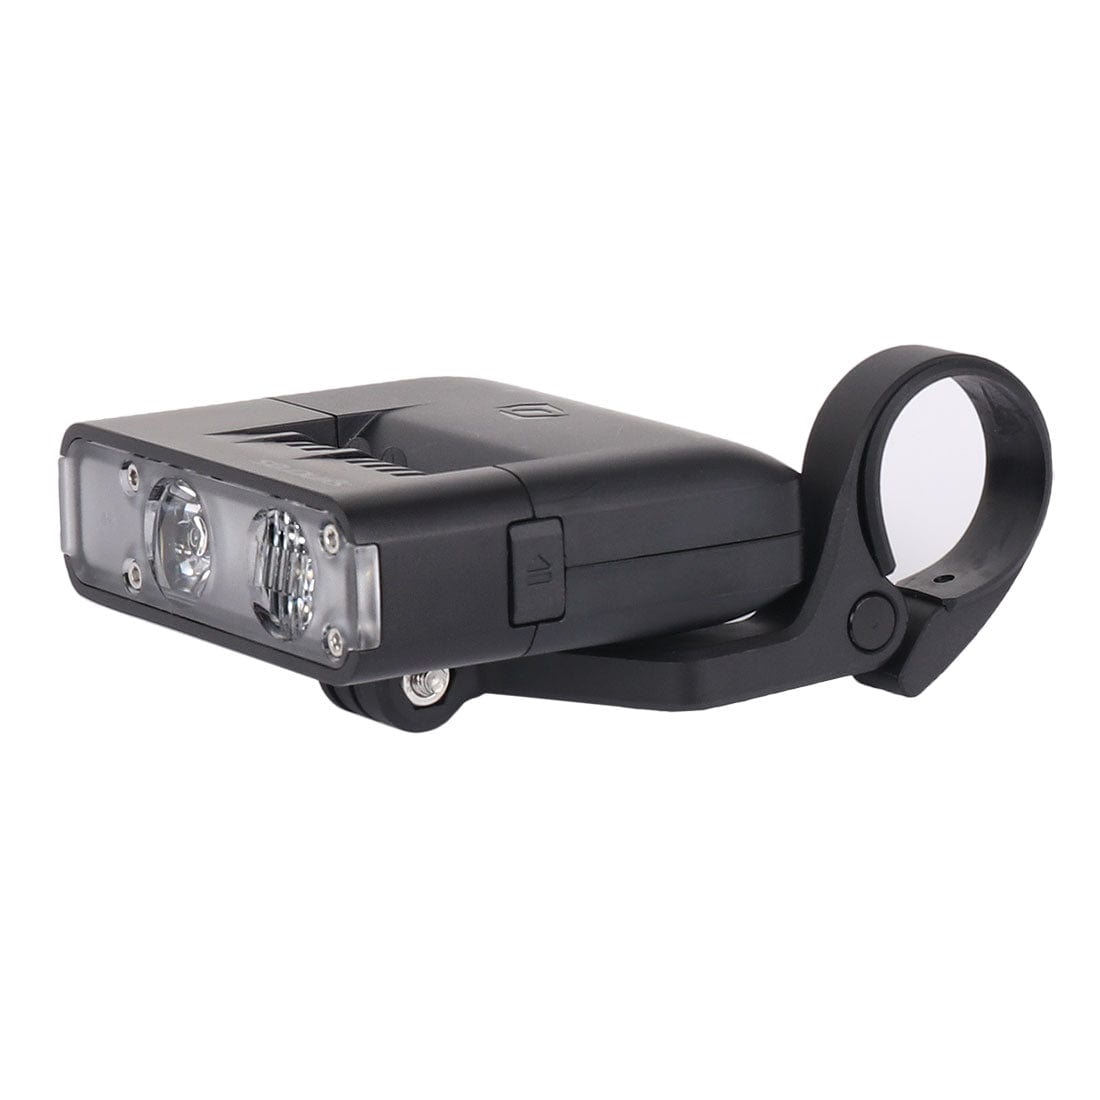 Syncros Nanaimo 1200 Front Light Accessories - Lights - Front